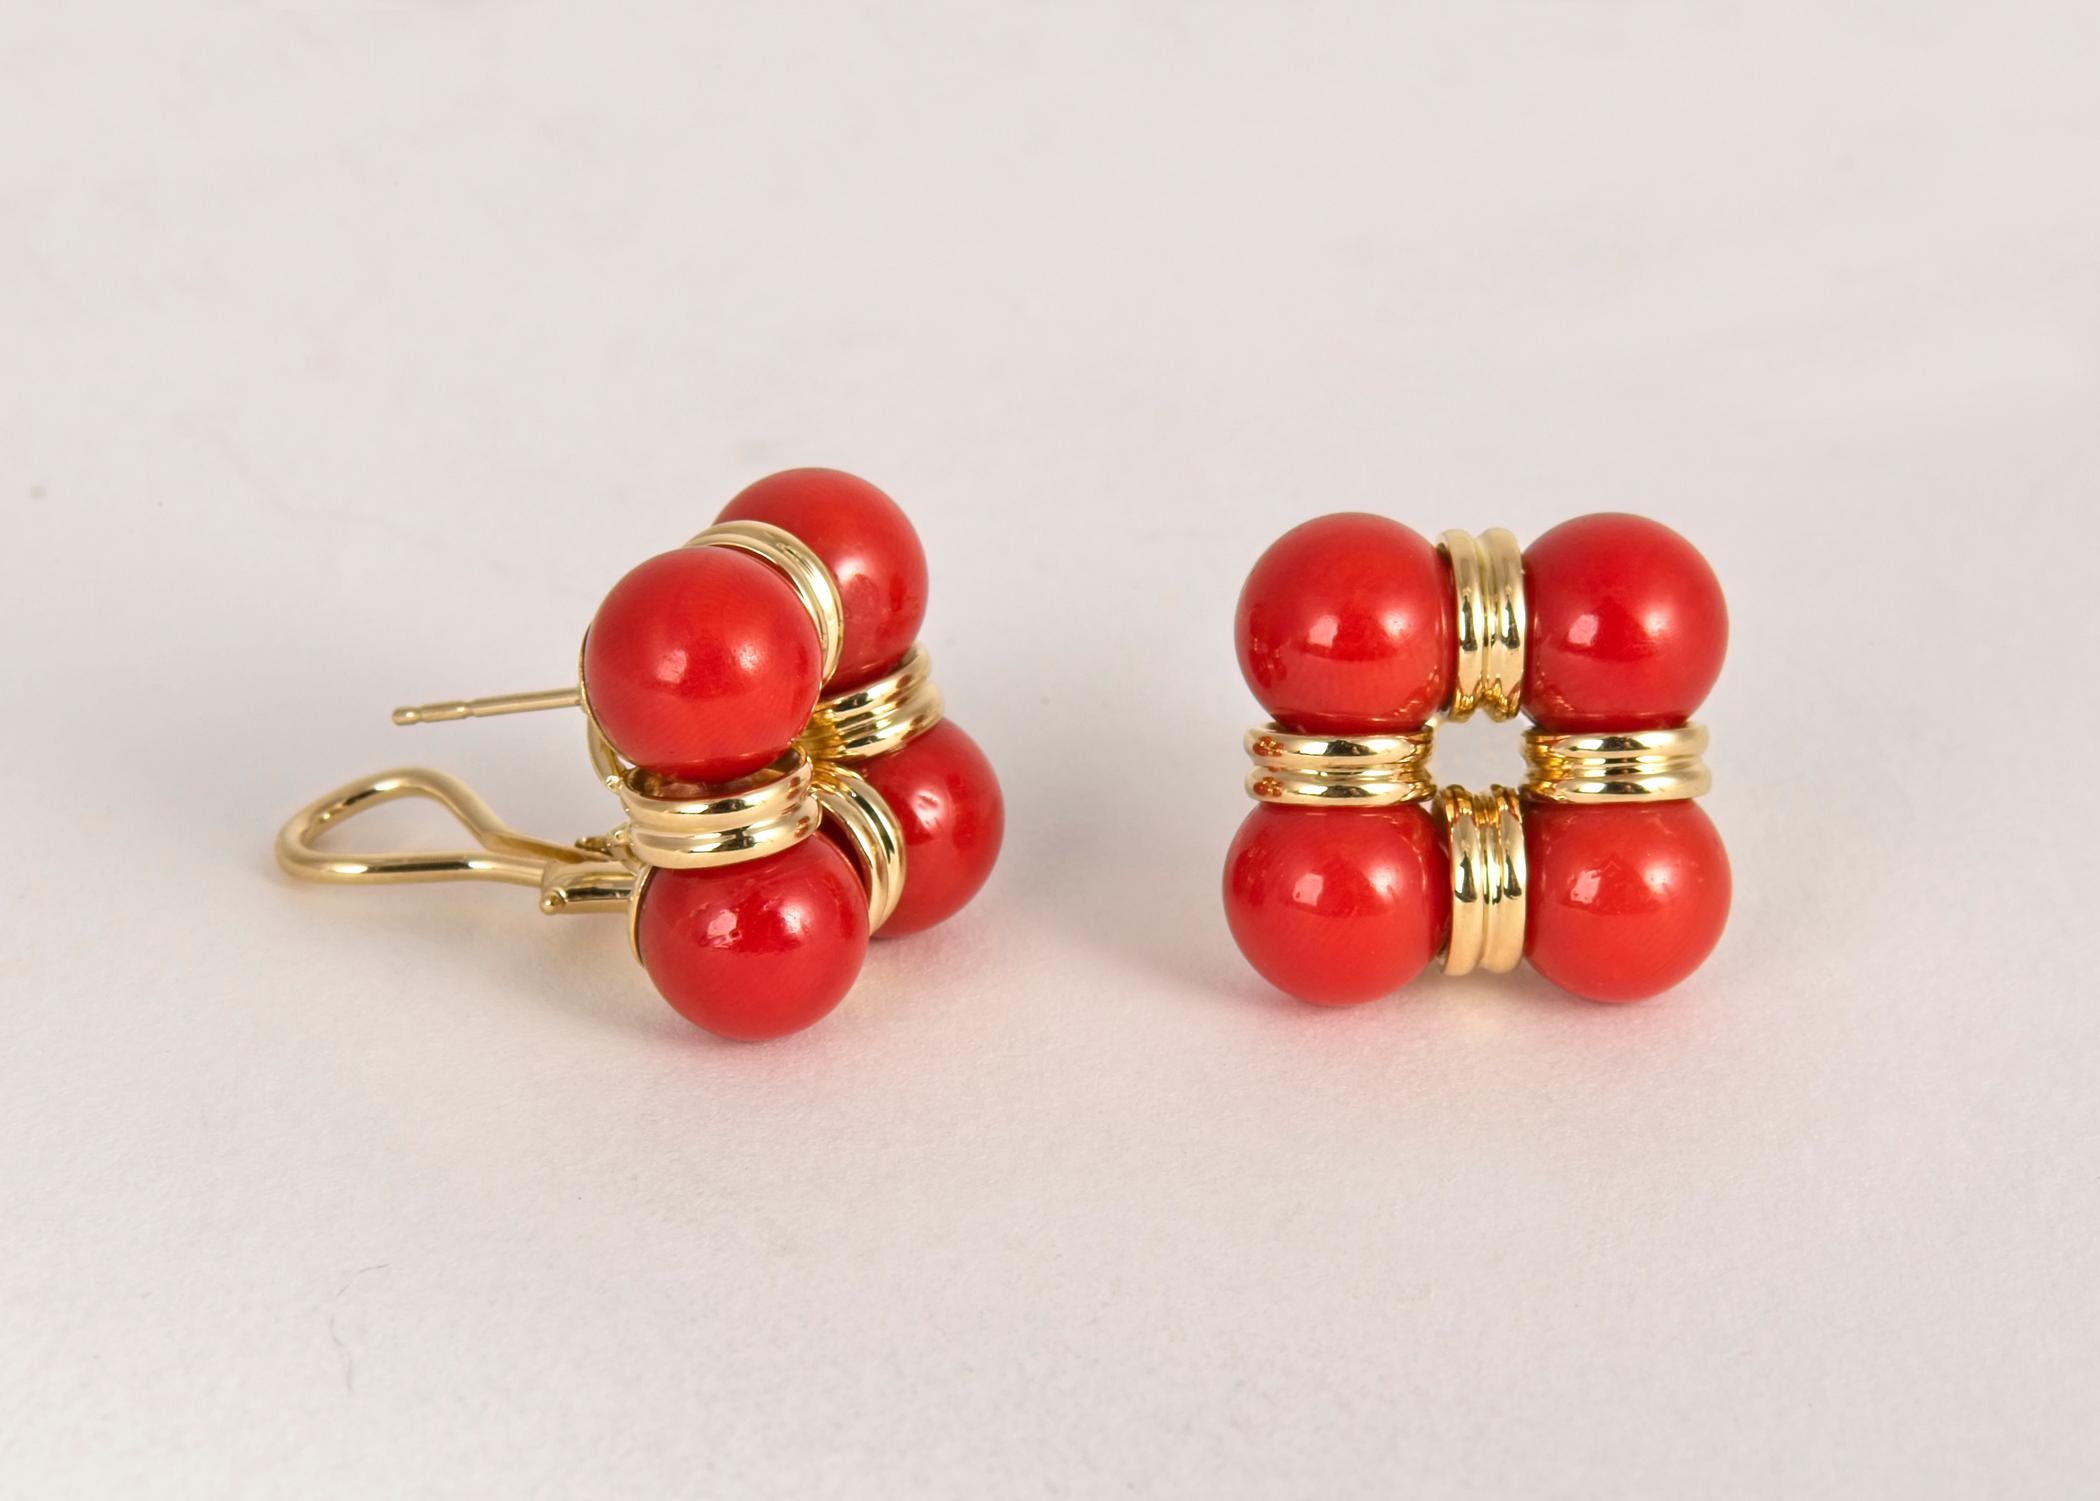 Trianon, the sister company of Seaman Schepps features vivid orange coral and rich 18k gold in this tailored elegant earring. 3/4's of an inch in size.